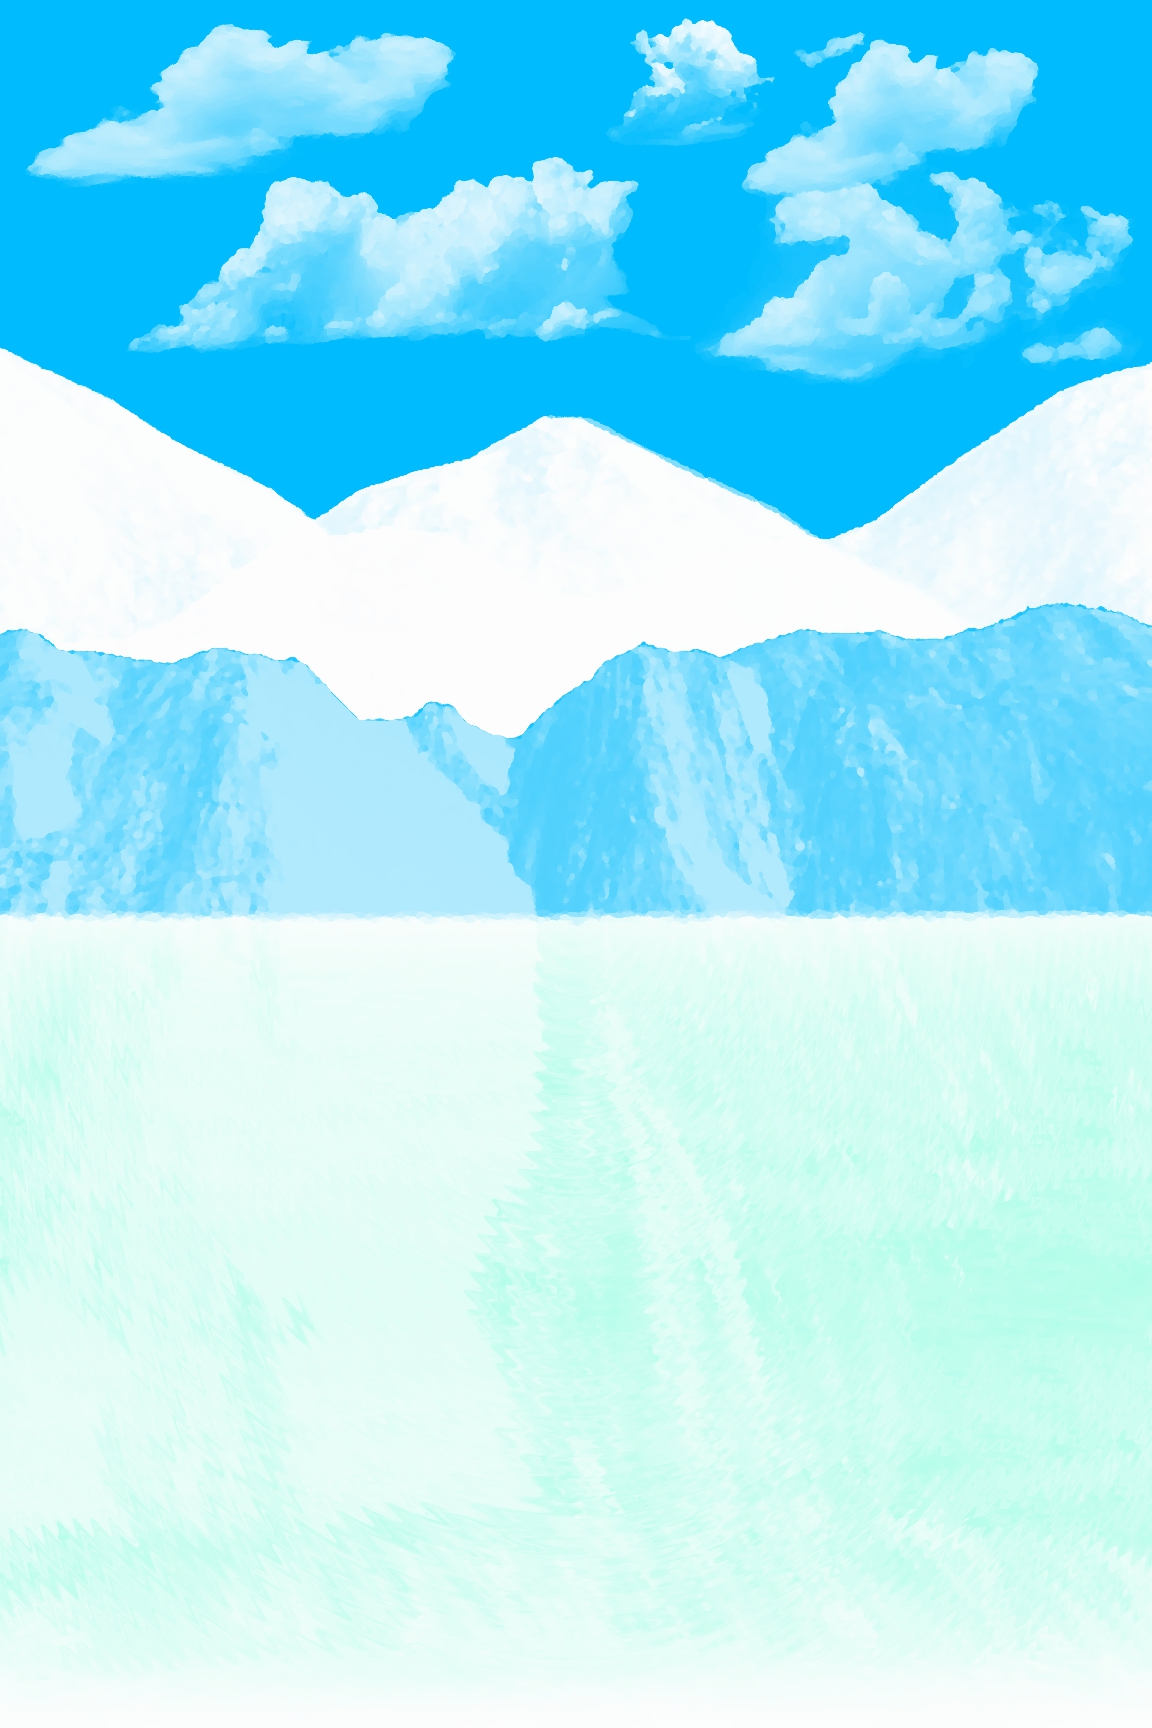 snow capped mountains clipart - photo #43